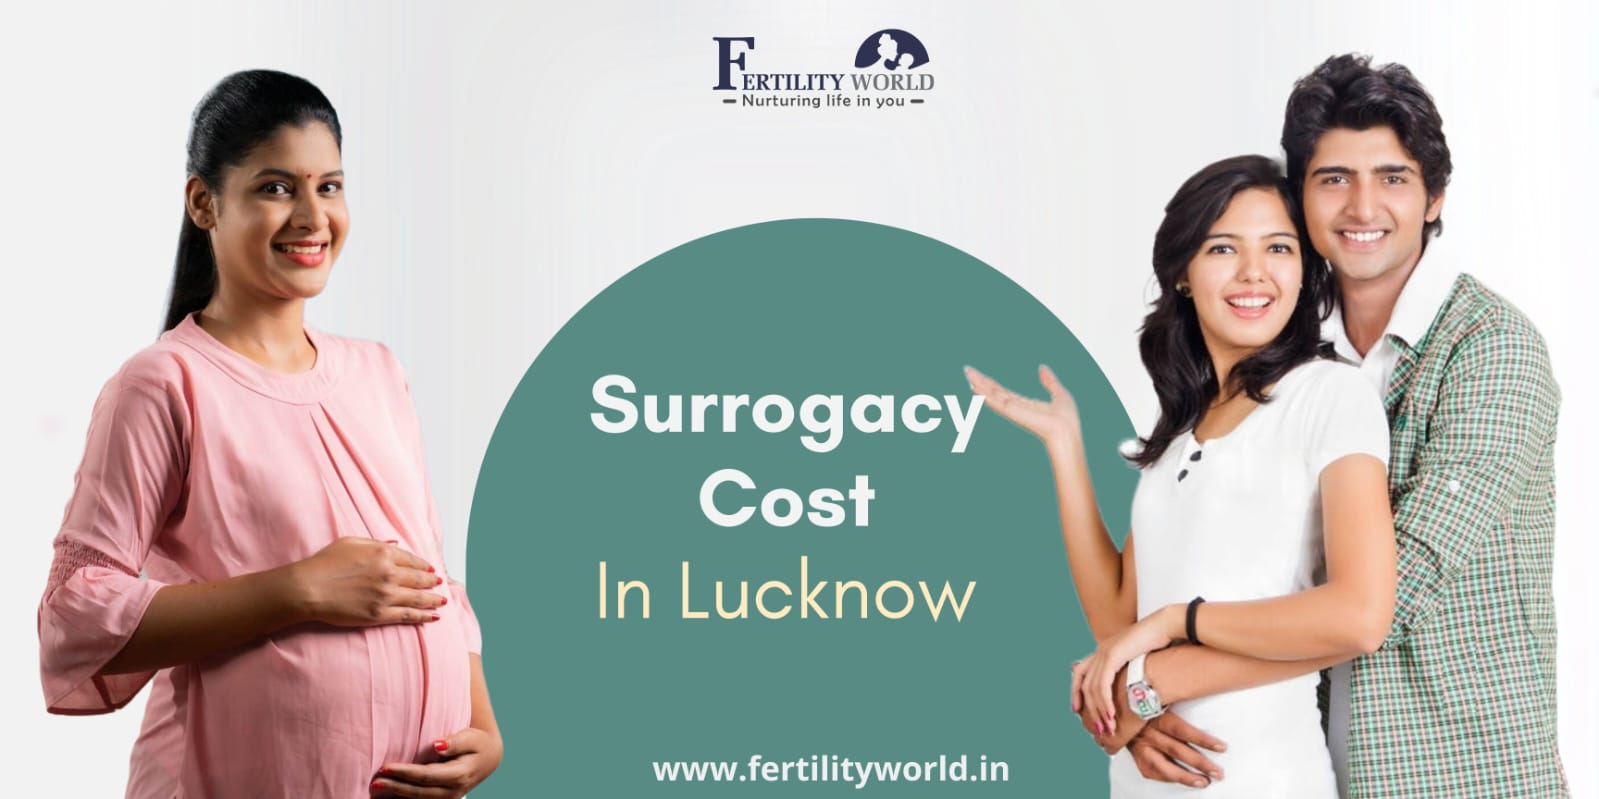 What is the Surrogacy cost in Lucknow?